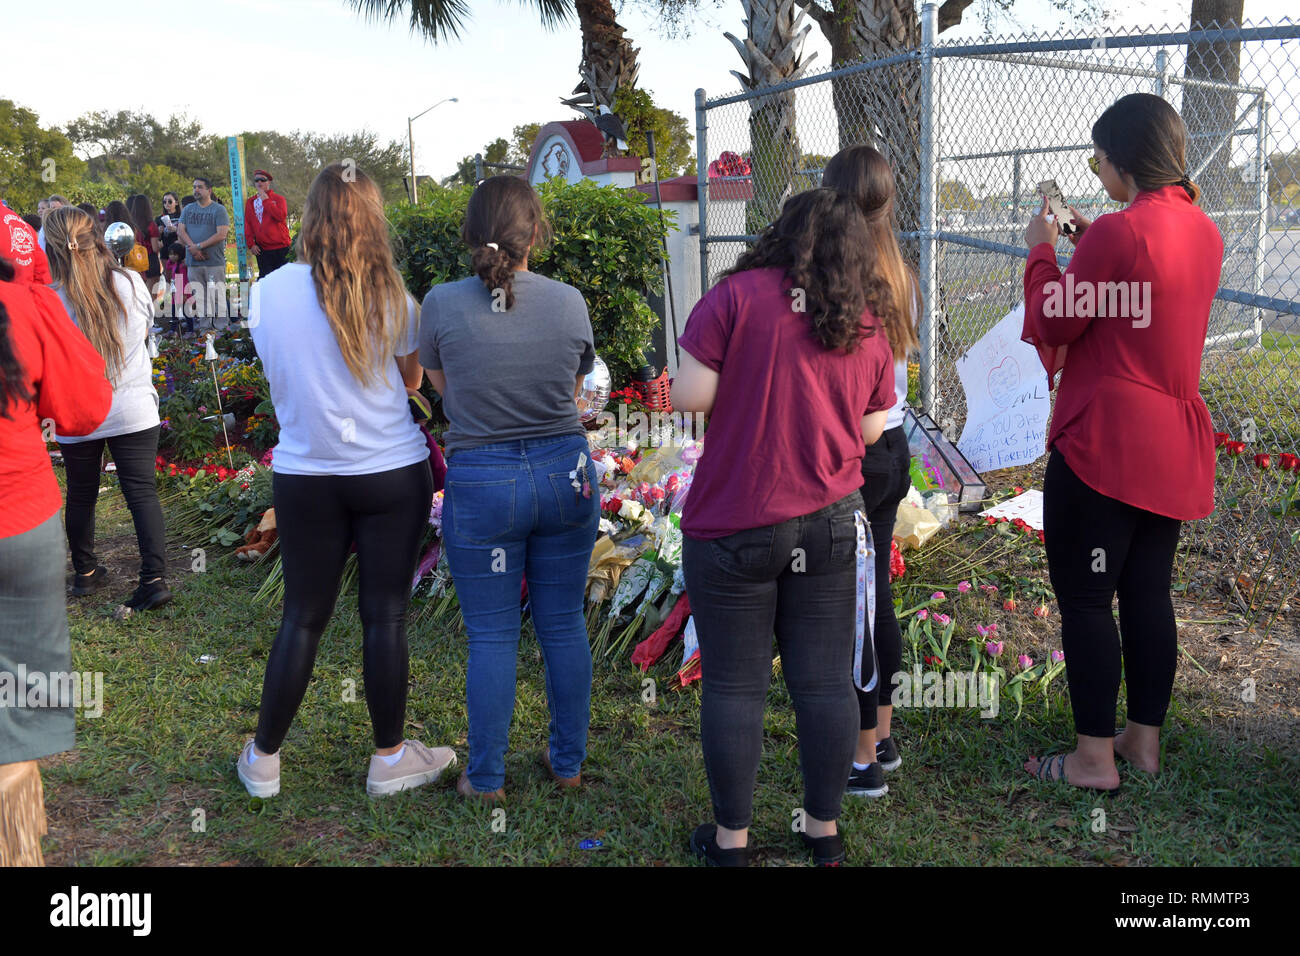 Parkland Fl February 14 Parkland Victims Remembered On One